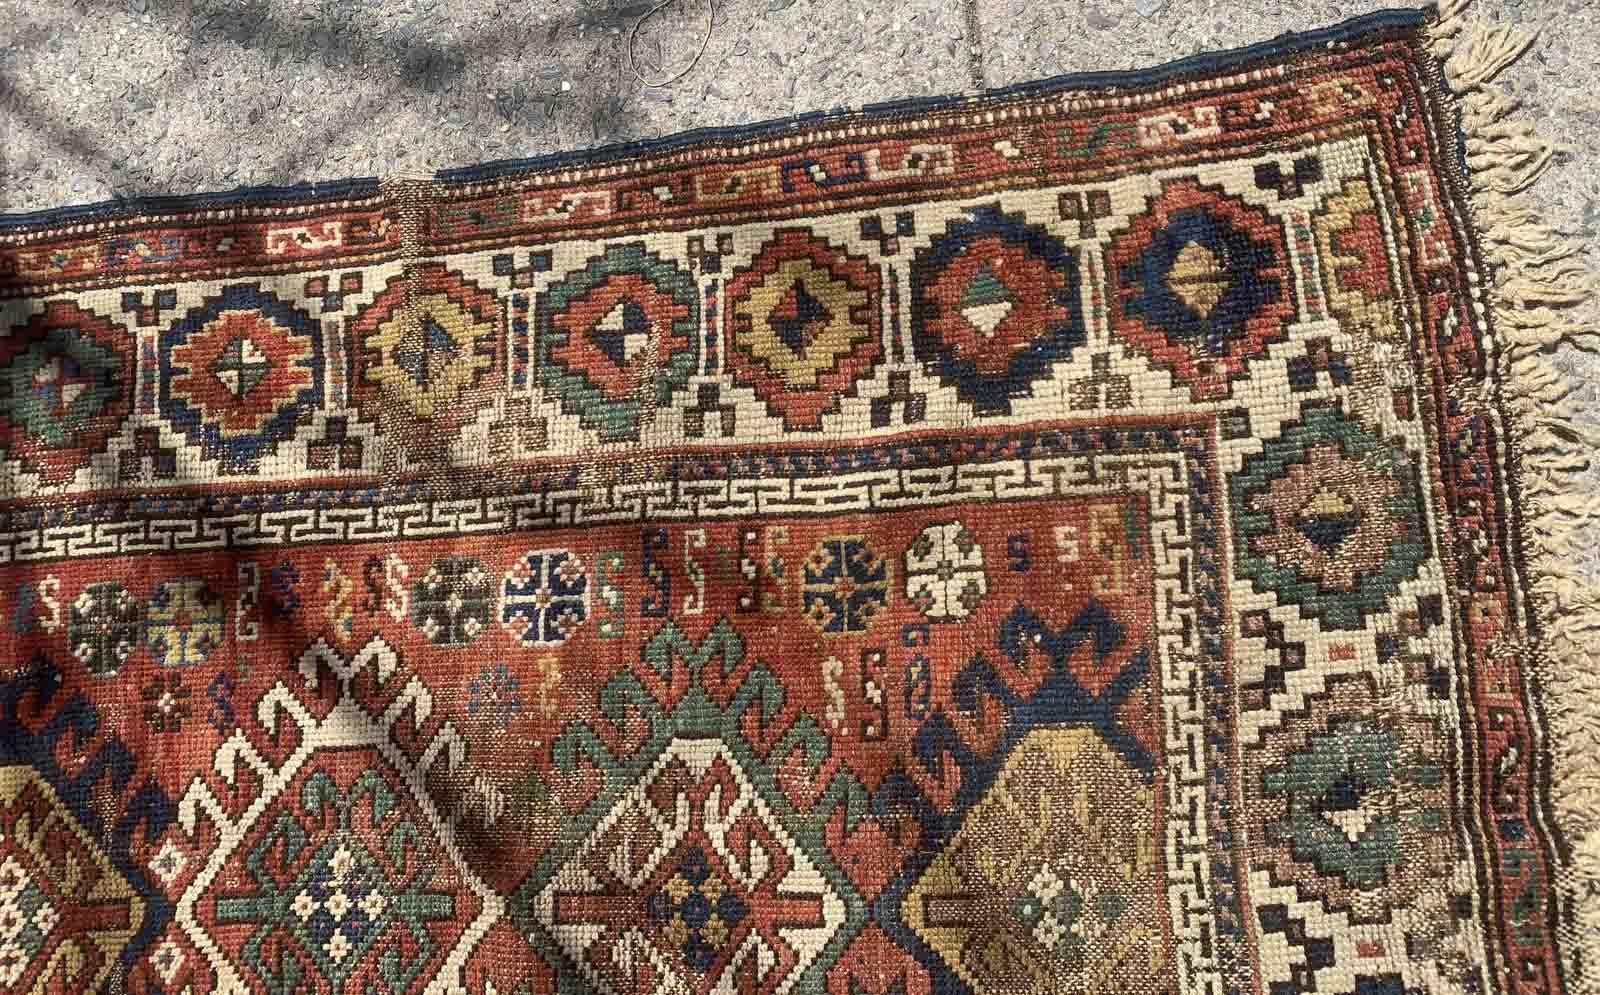 Handmade antique Caucasian Kazak rug in red color. The rug is from the end of 19th century in distressed condition.

-condition: original, distressed,

-circa: 1880s,

-size: 3.4' x 4.4' (103cm x 134cm),

-material: wool,

-country of